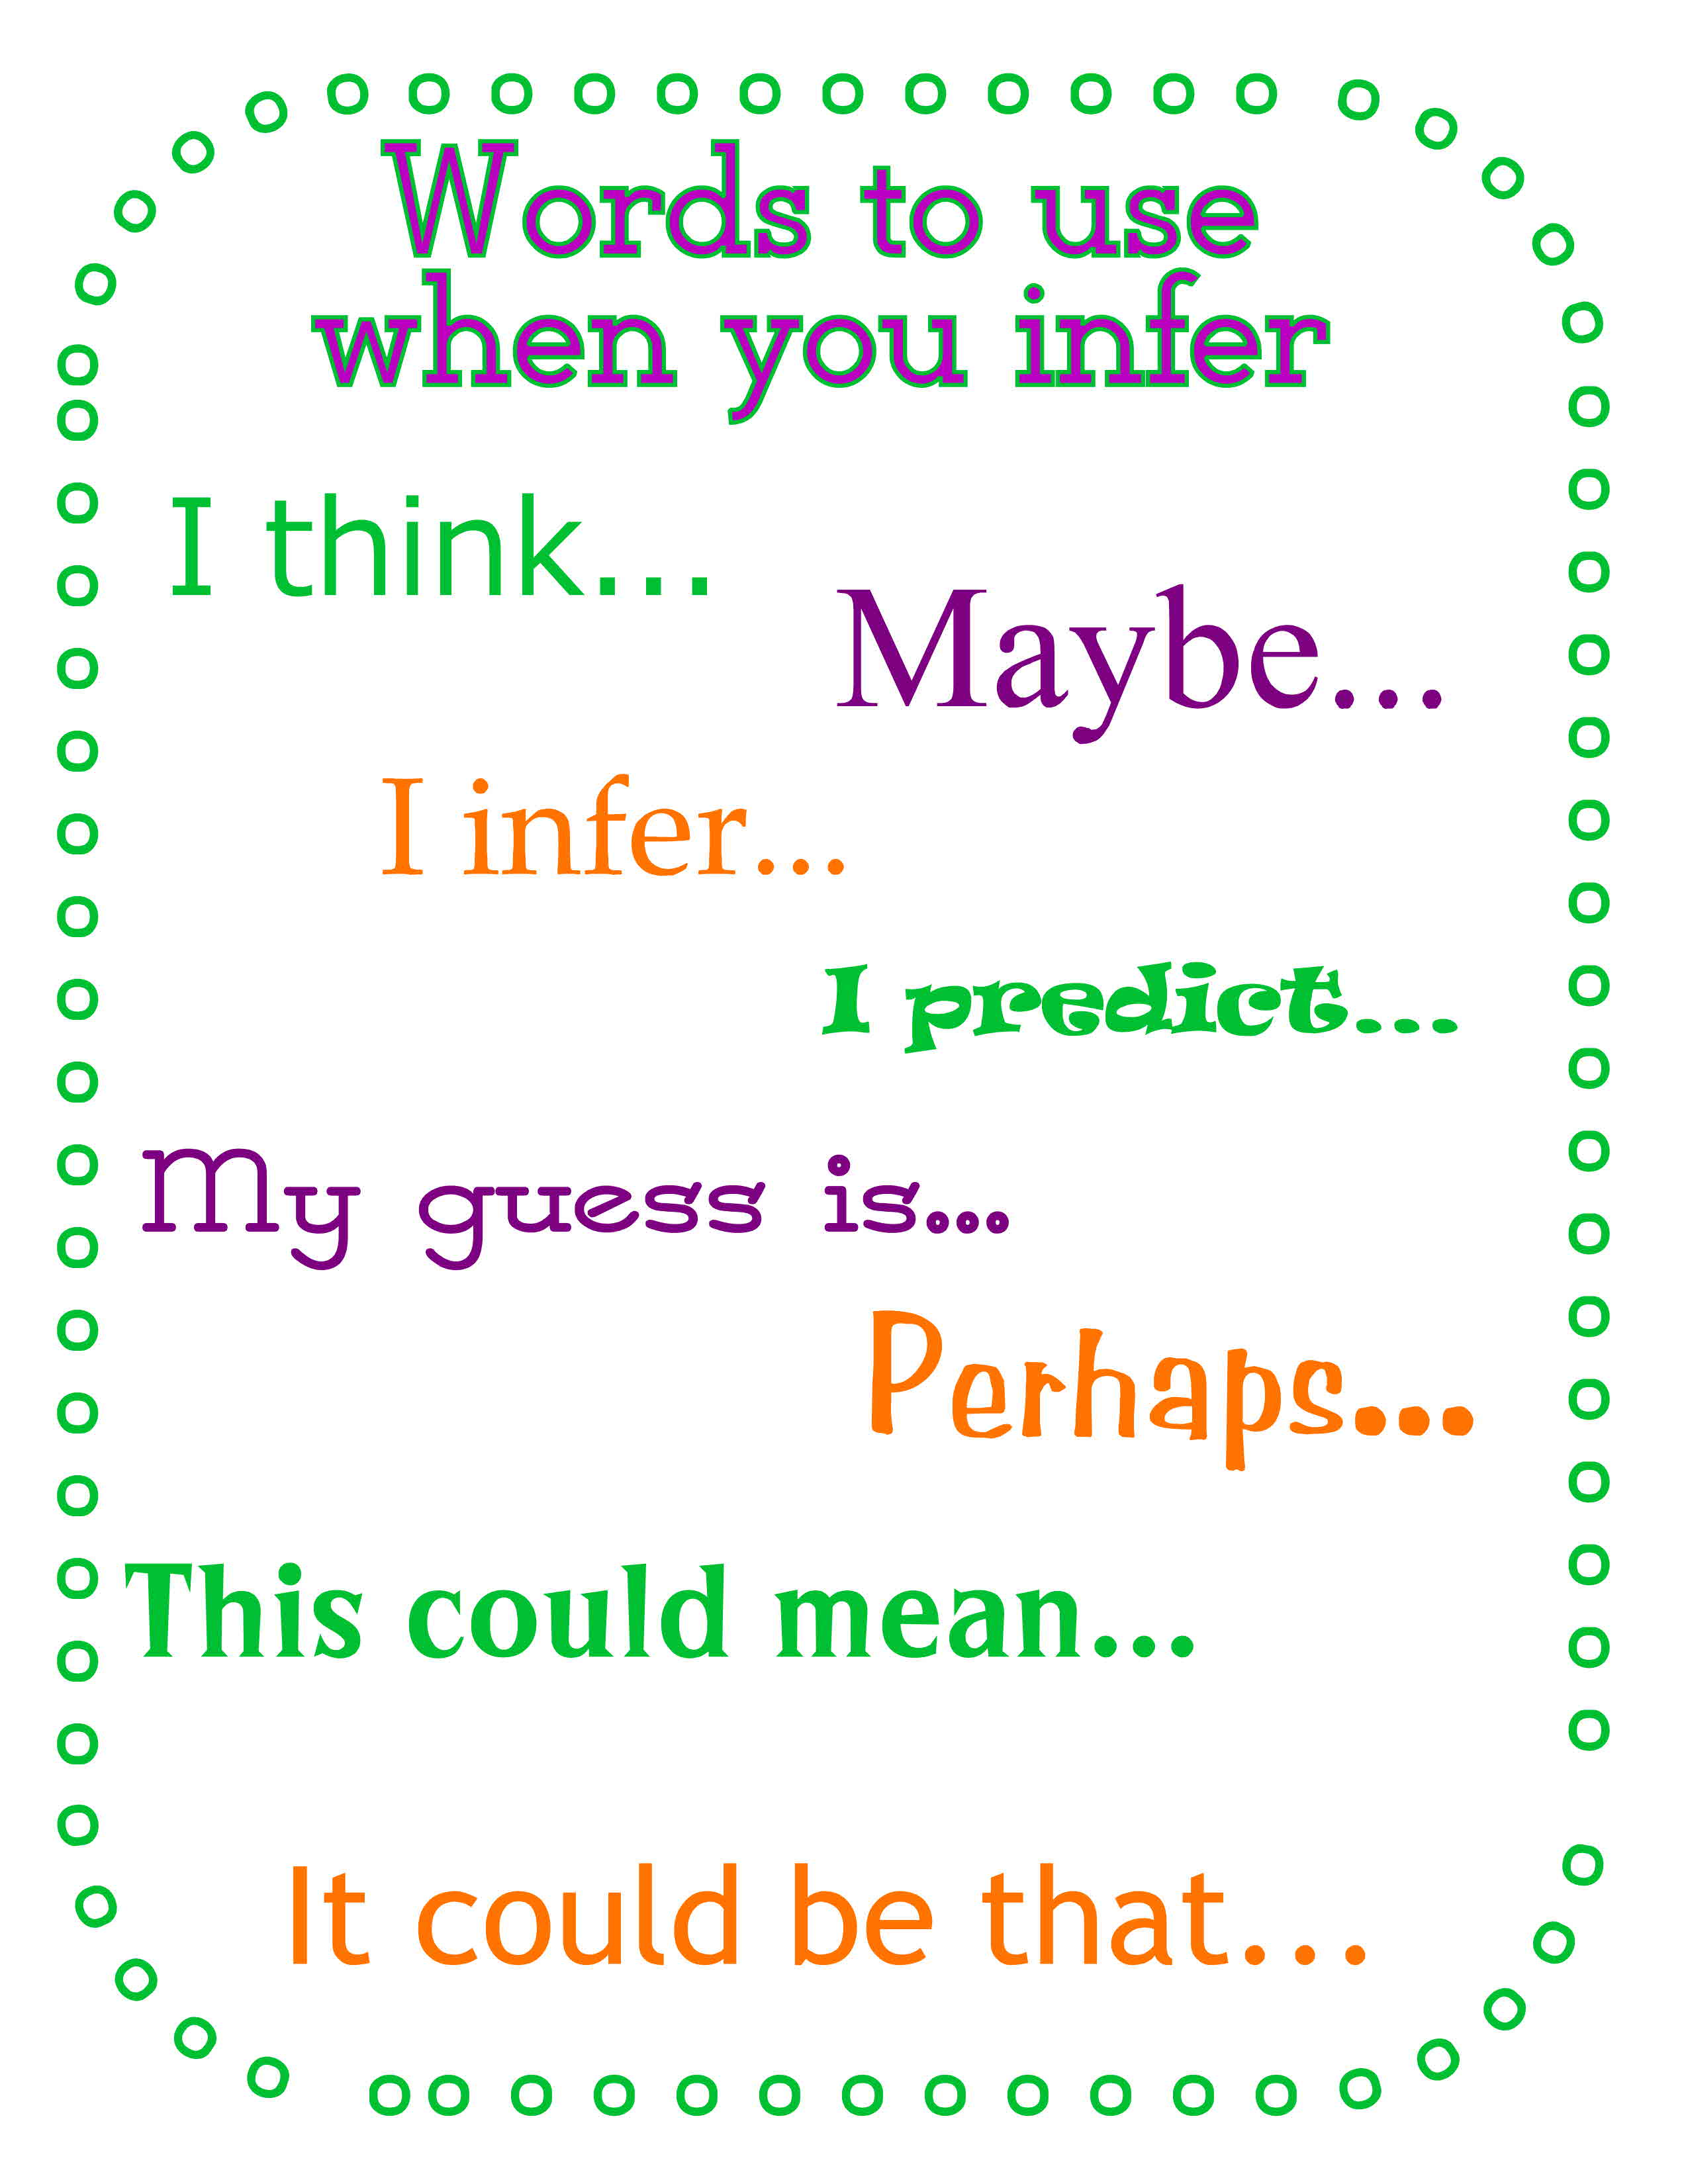 inferring-from-photo-prompts-the-curriculum-corner-123